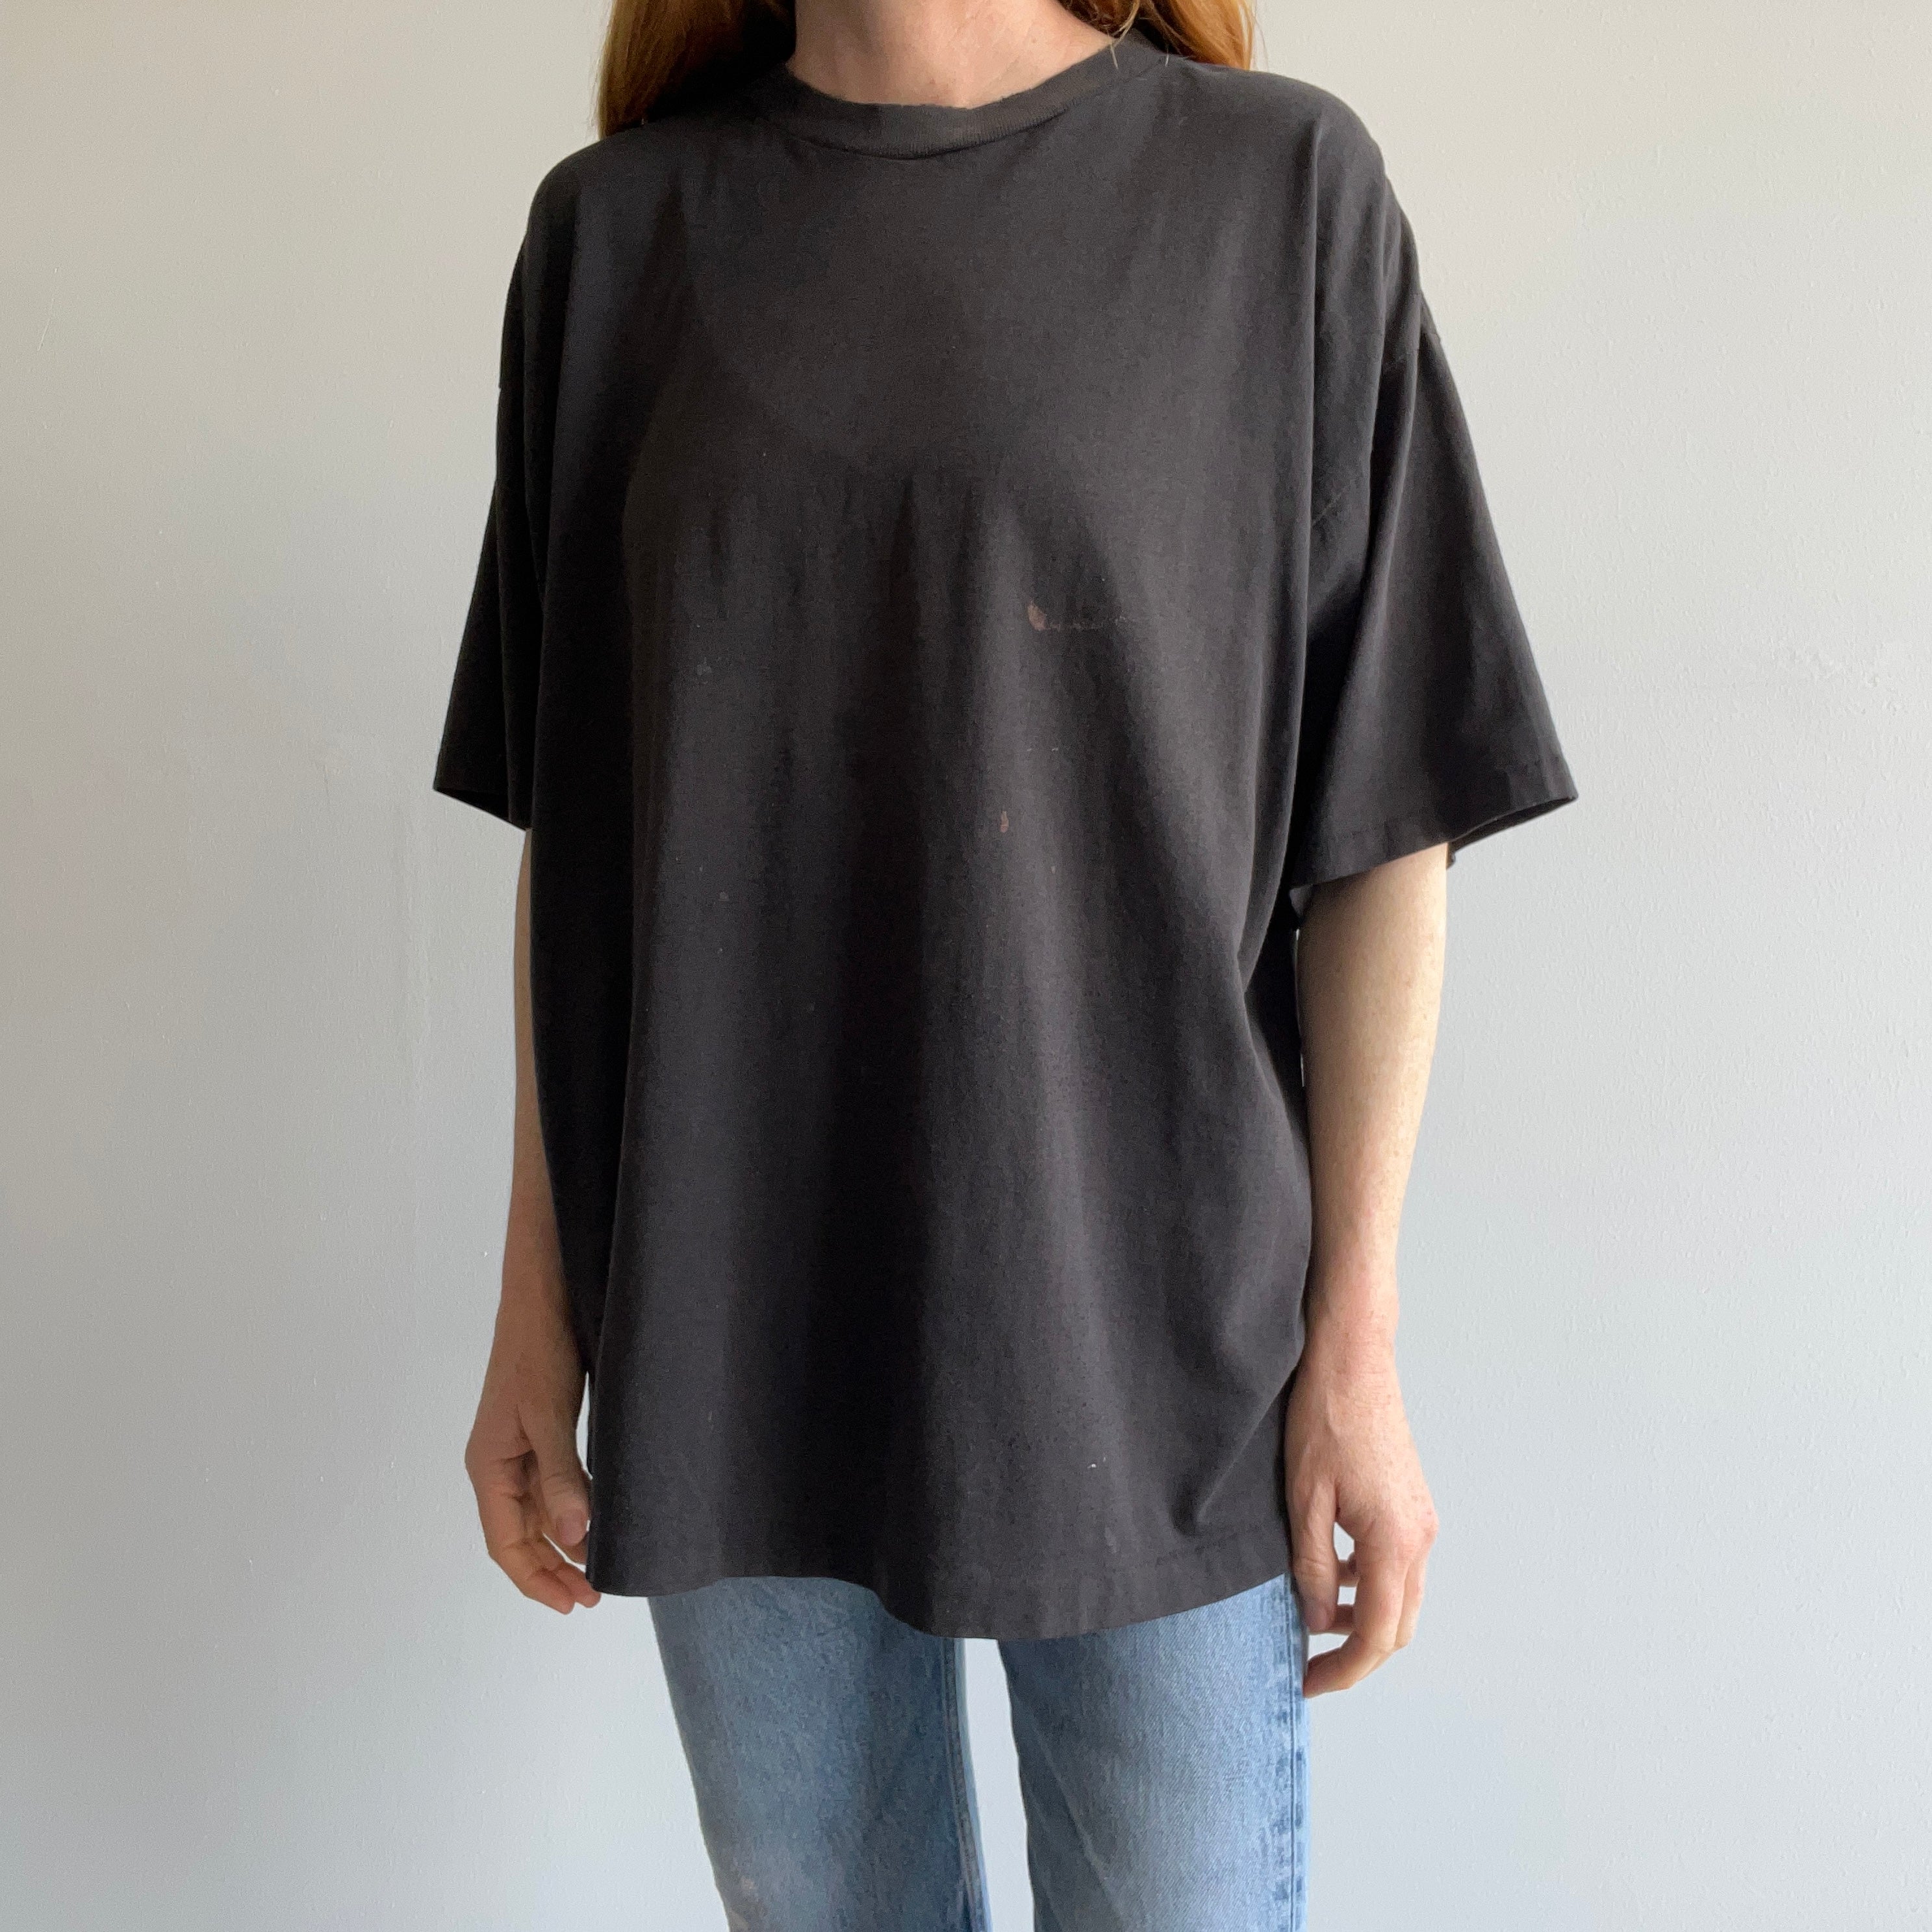 1980/90s Tattered Torn and Worn Larger Faded Blank Black T-Shirt